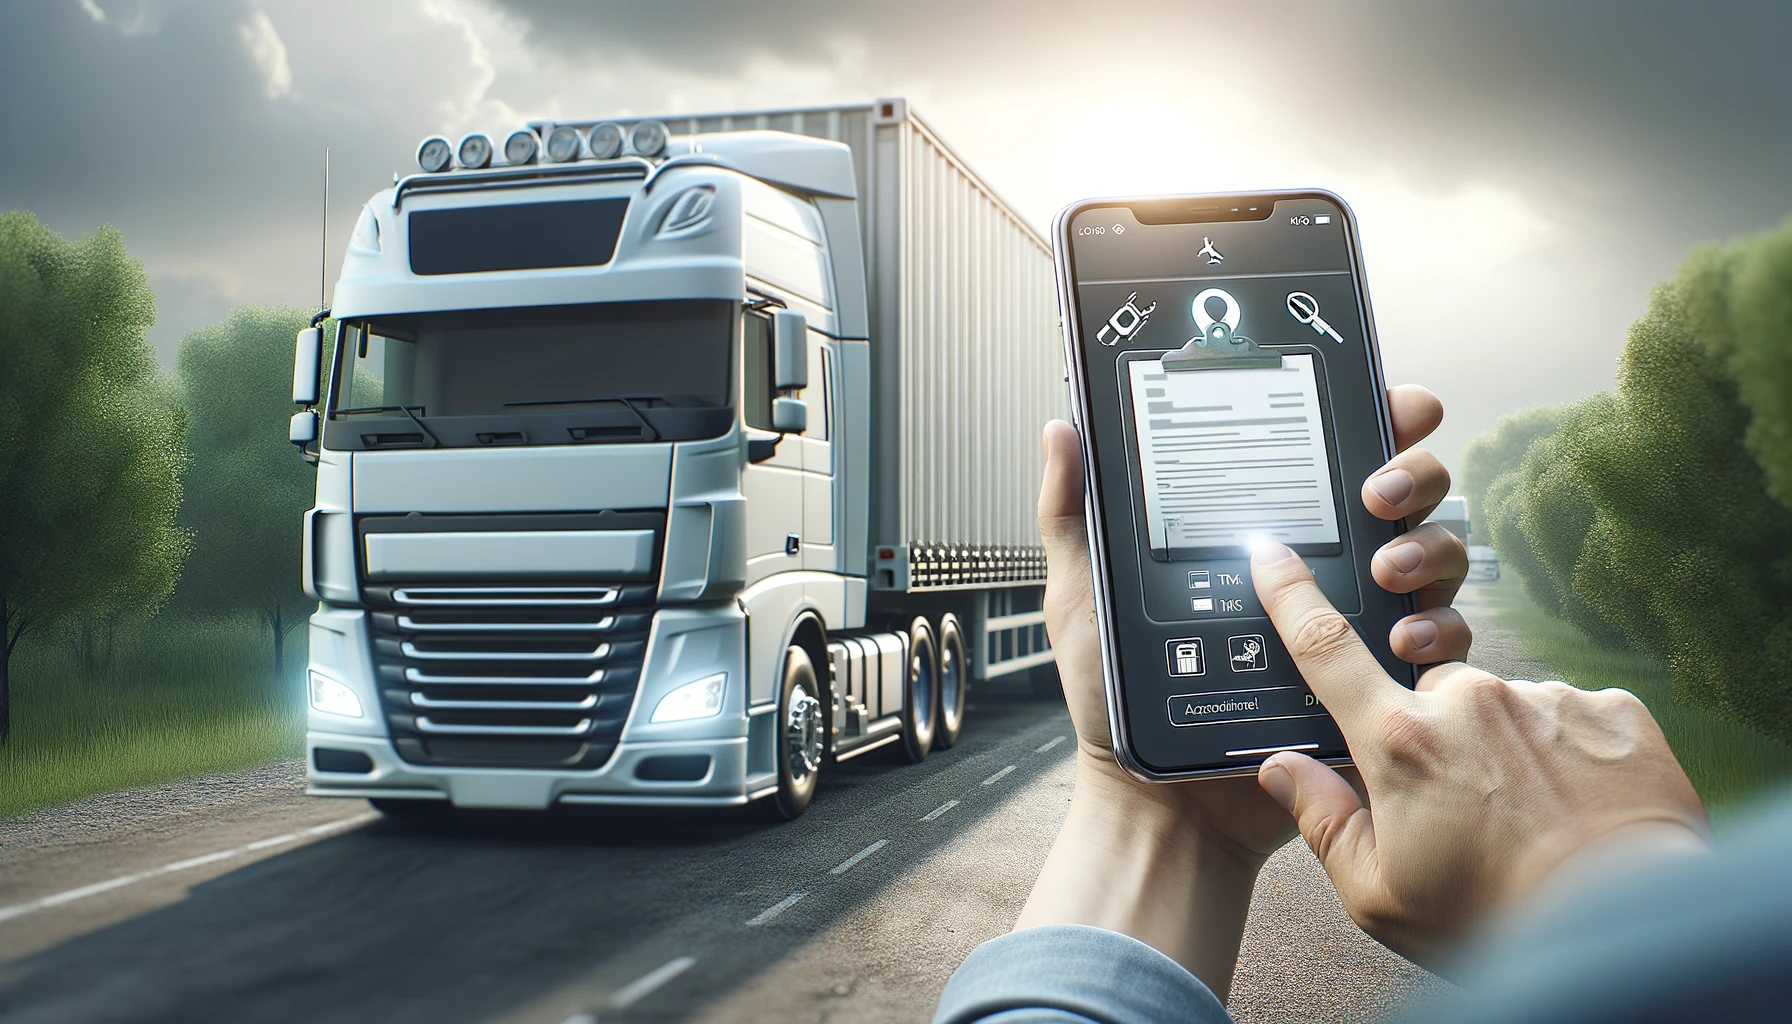 DALL·E 2024-04-12 20.19.36 - A scene depicting a truck driver using a mobile app on a smartphone while standing beside his vehicle. The phone screen shows an interface for accessi